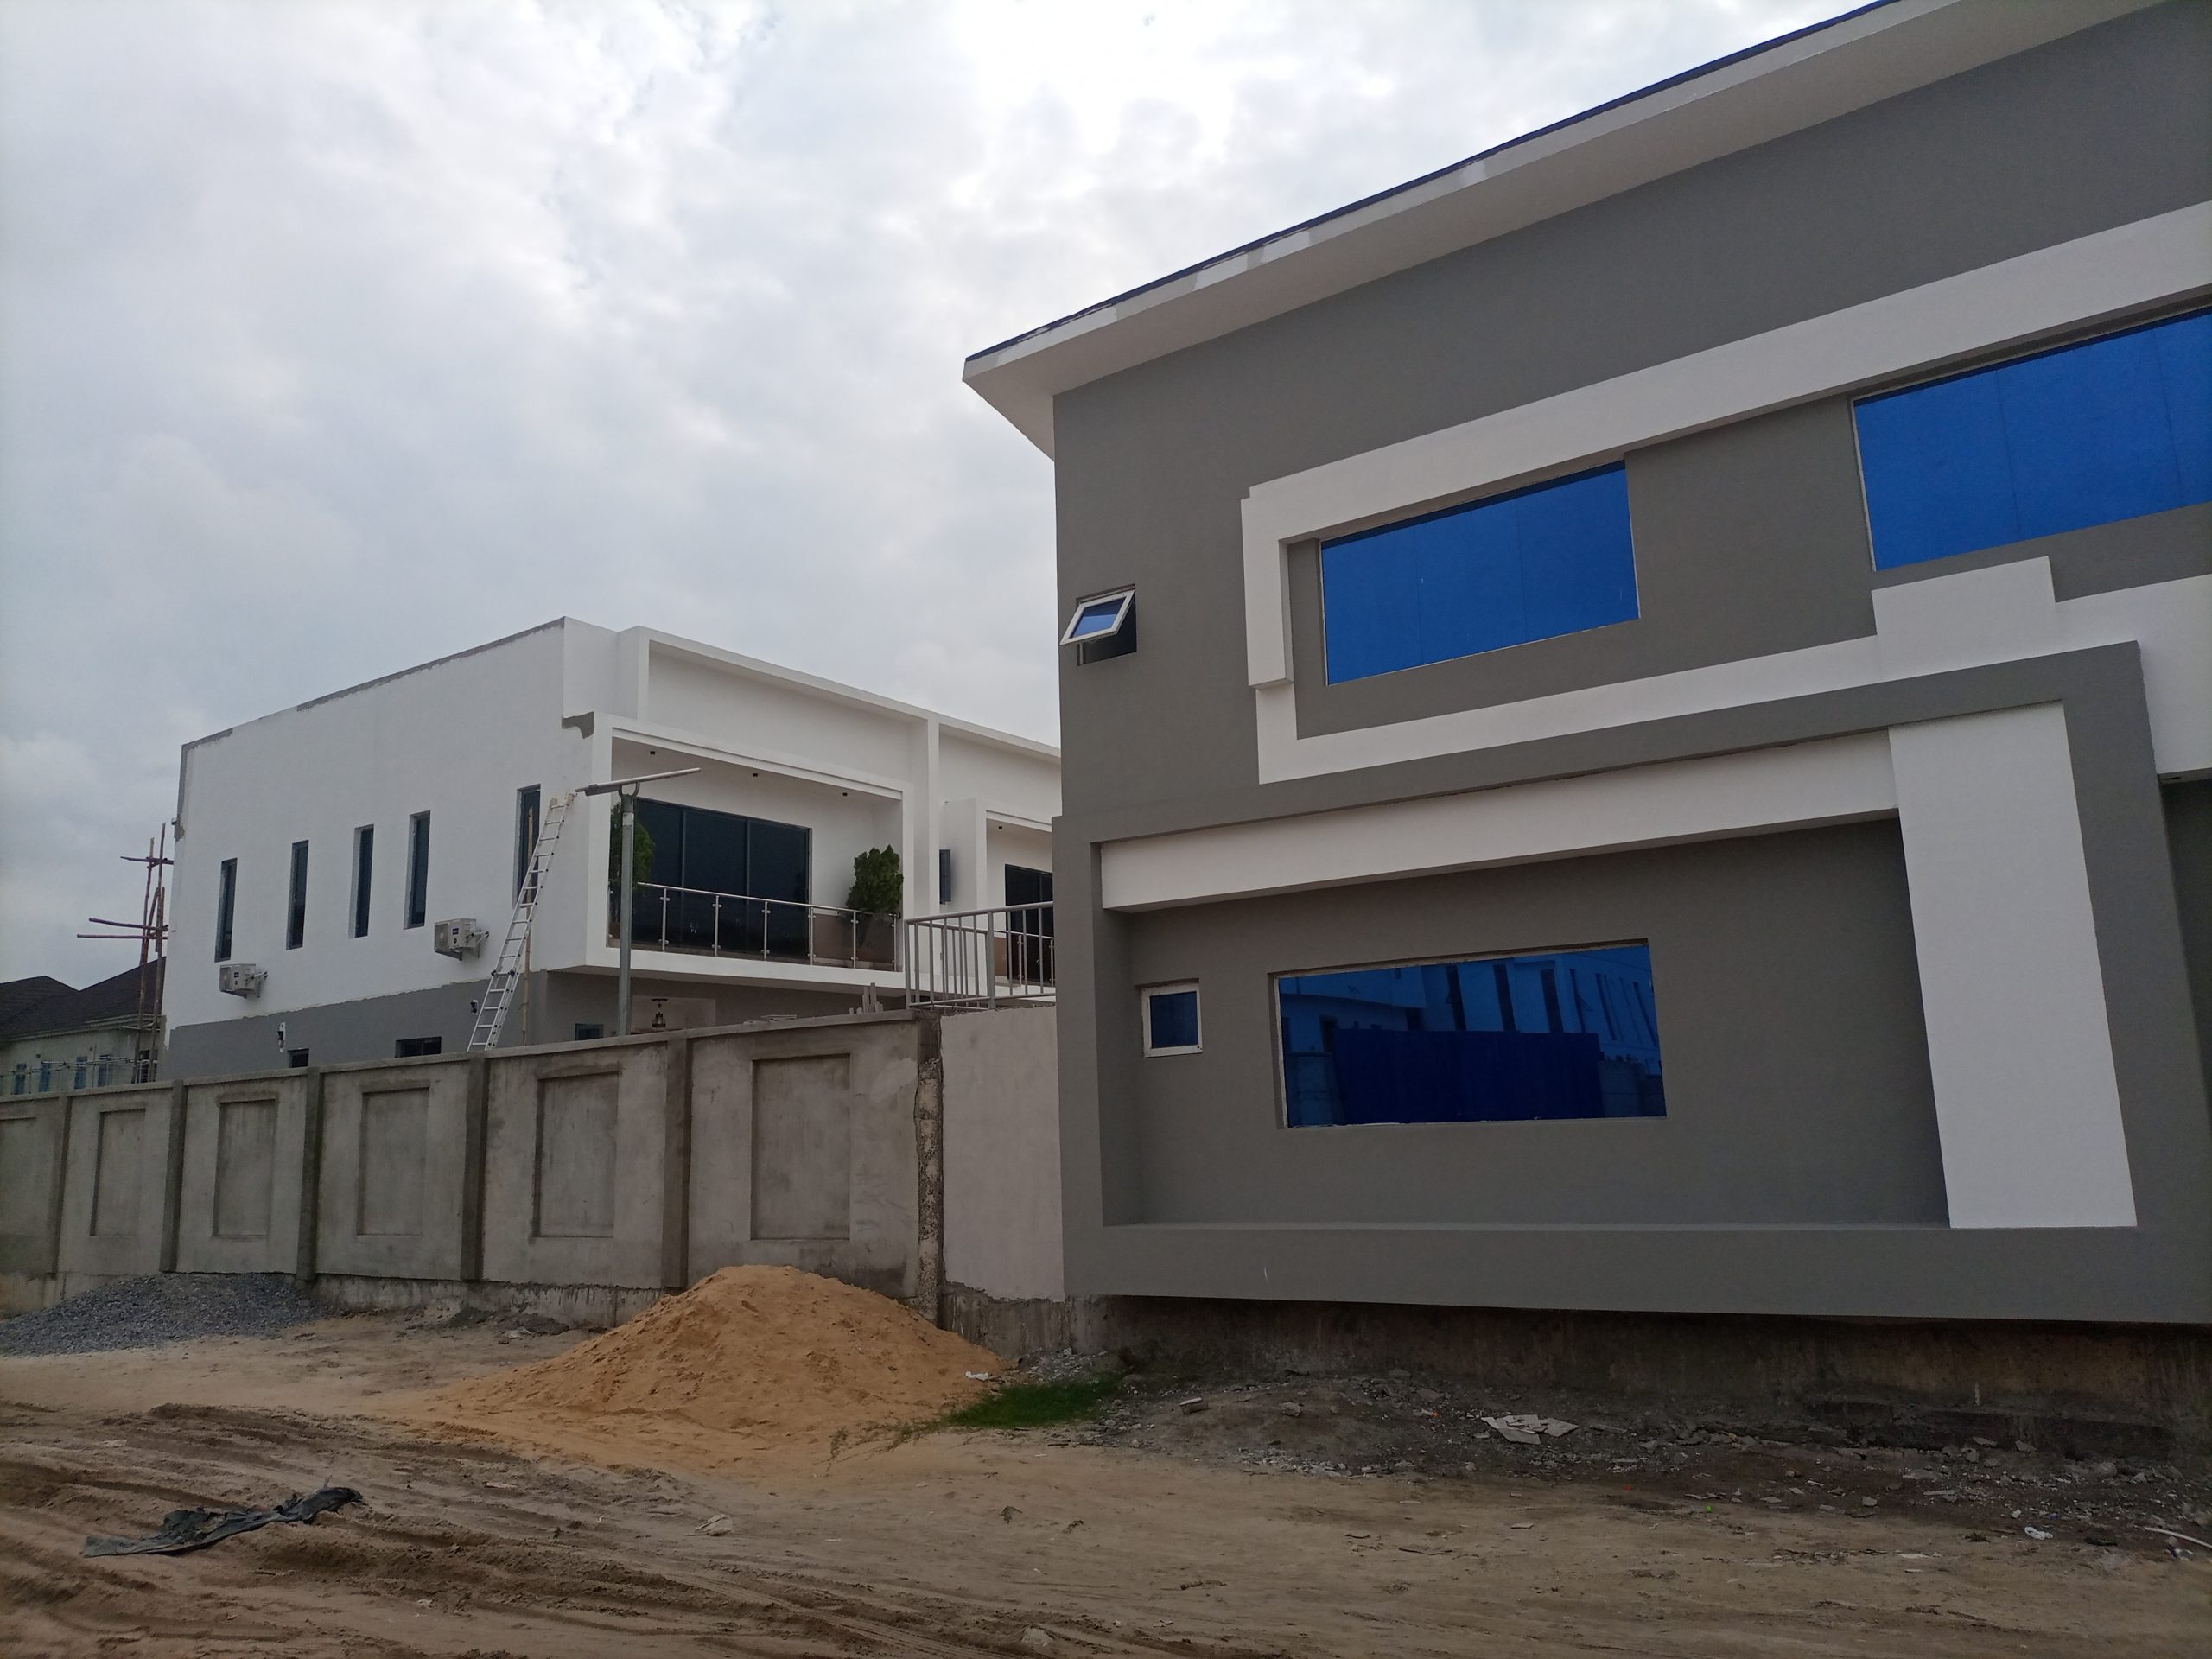 Gate House and Welcome Center of Ambiance Estate, Ajah with 2 and 4 Bedroom Duplex For Sale with installment payment